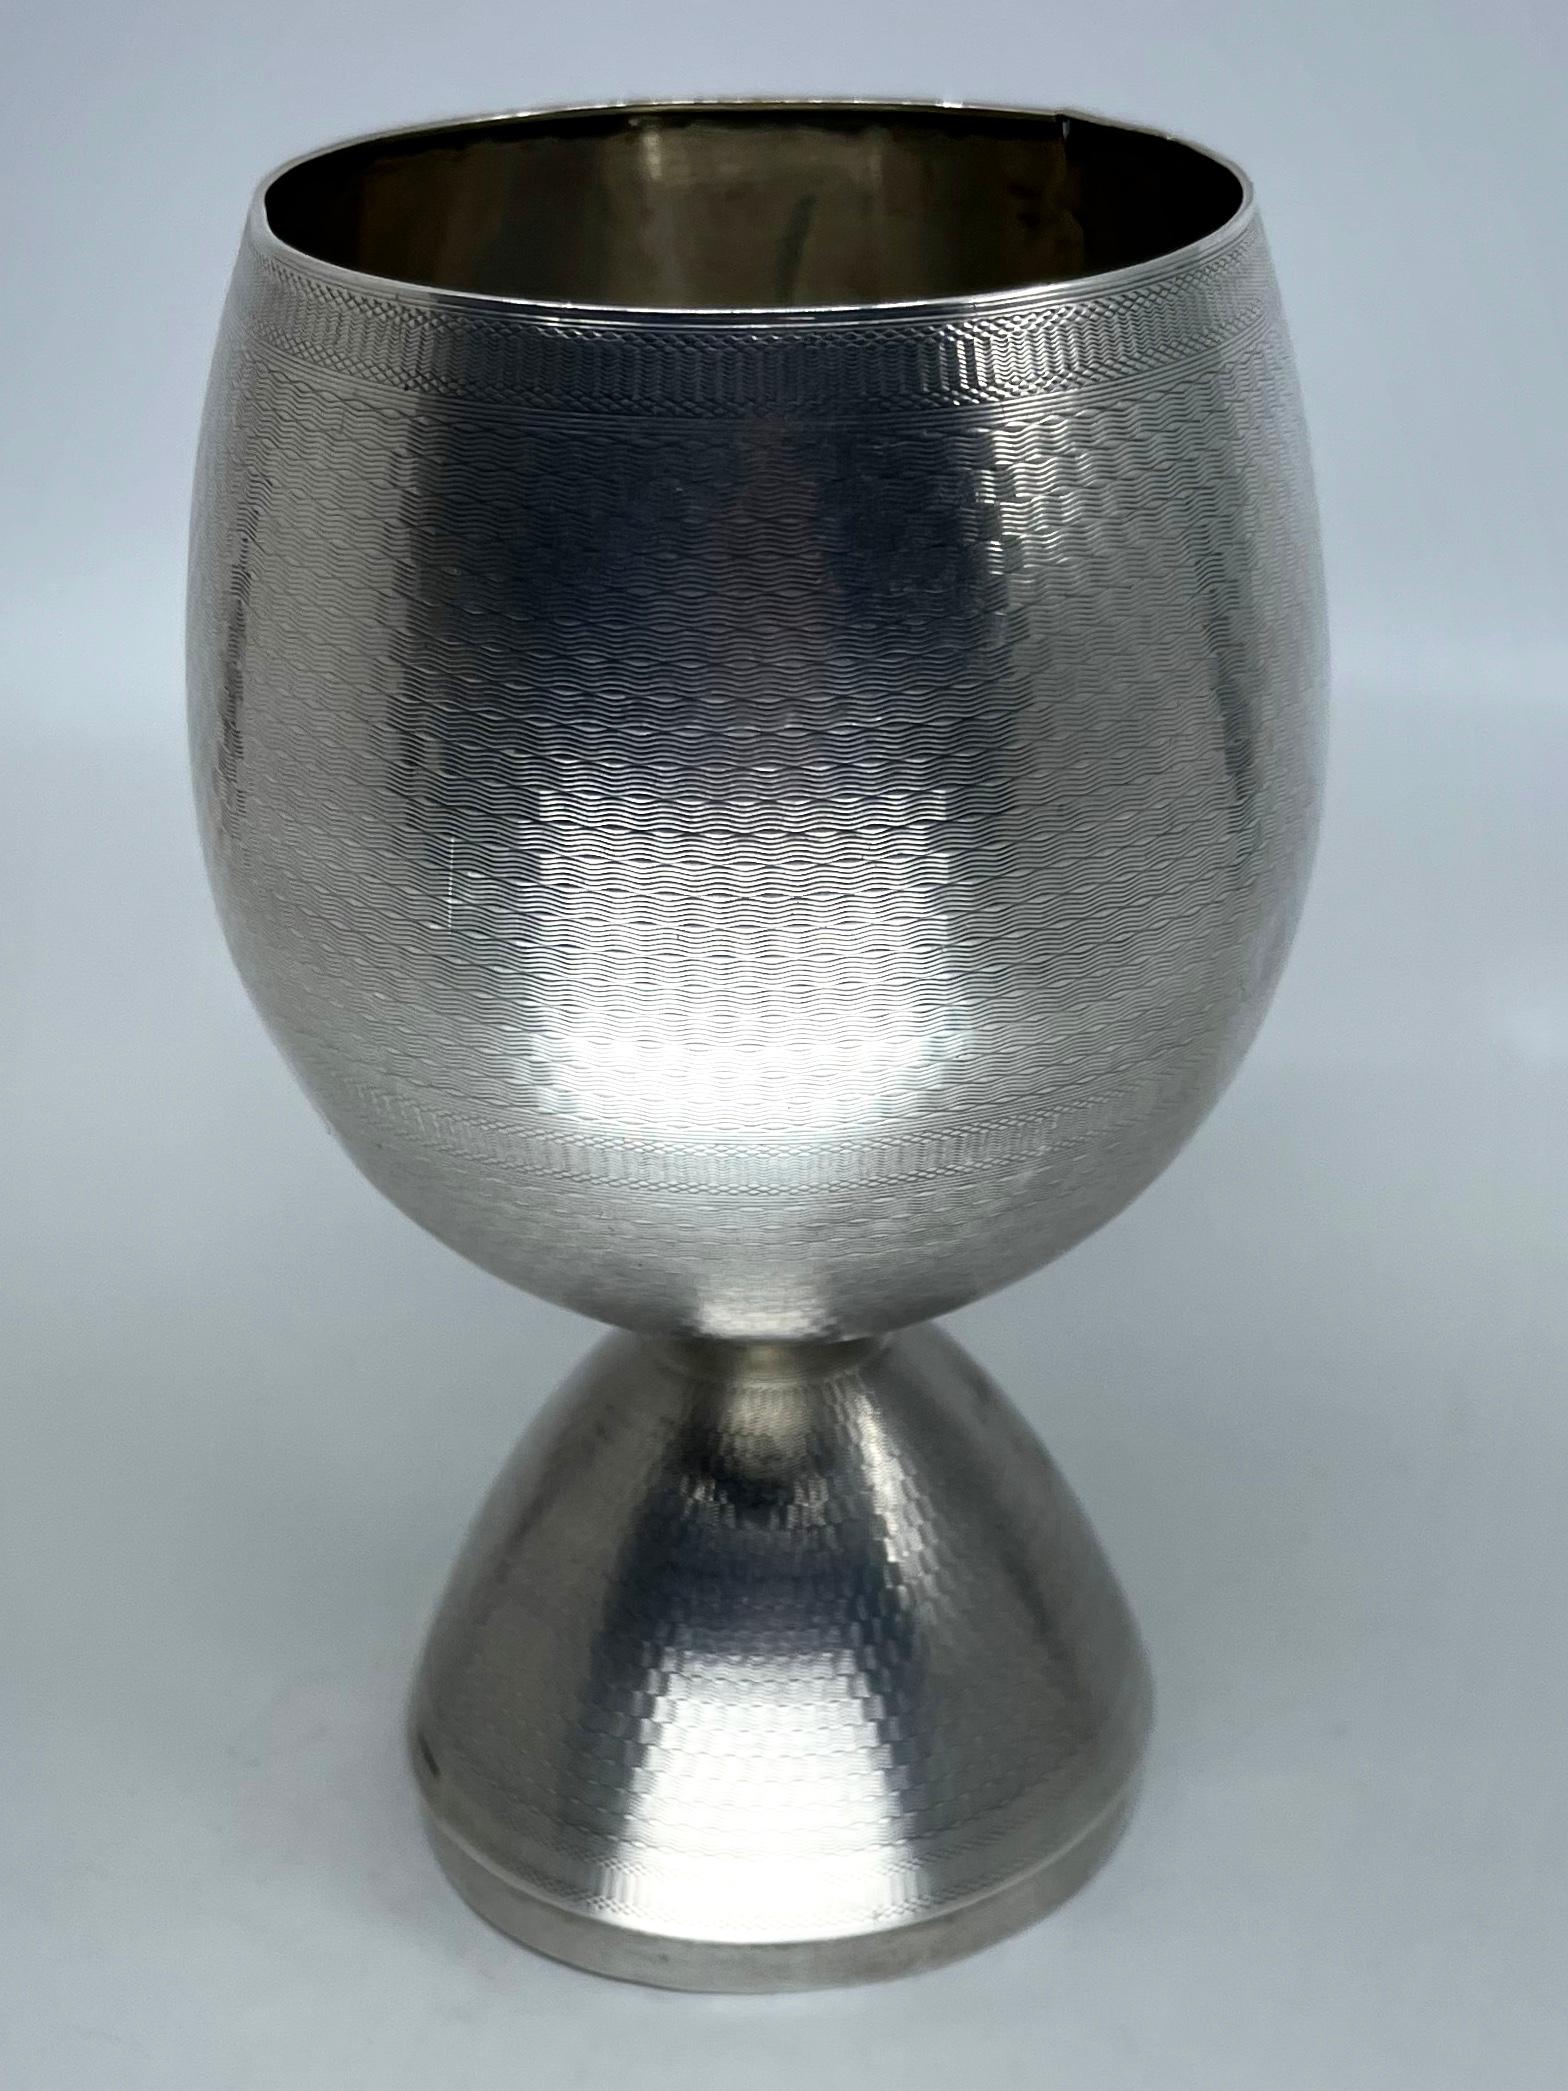 Sterling silver traveling campaign egg chalice. Mid 19th century engine turned metamorphic egg shaped chalice for the gentlemen on campaign with engraved cartouche and blank field ready for monogram. Continental, mid 19th century
Dimensions: in cup